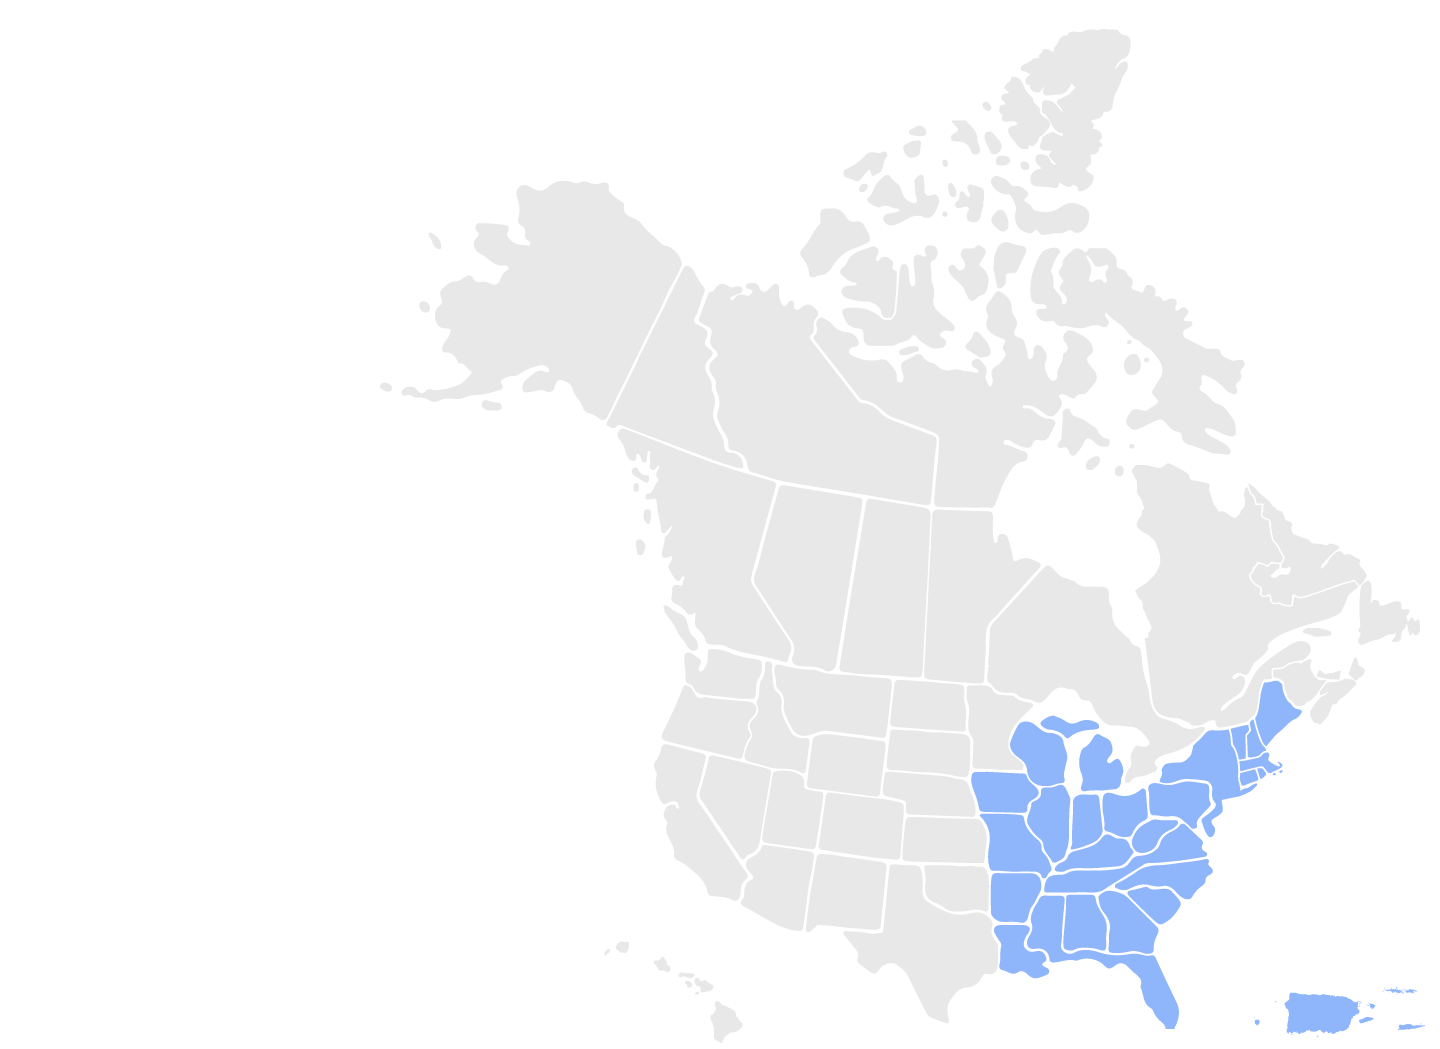 US and Canada map with the eastern US states highlighted in blue